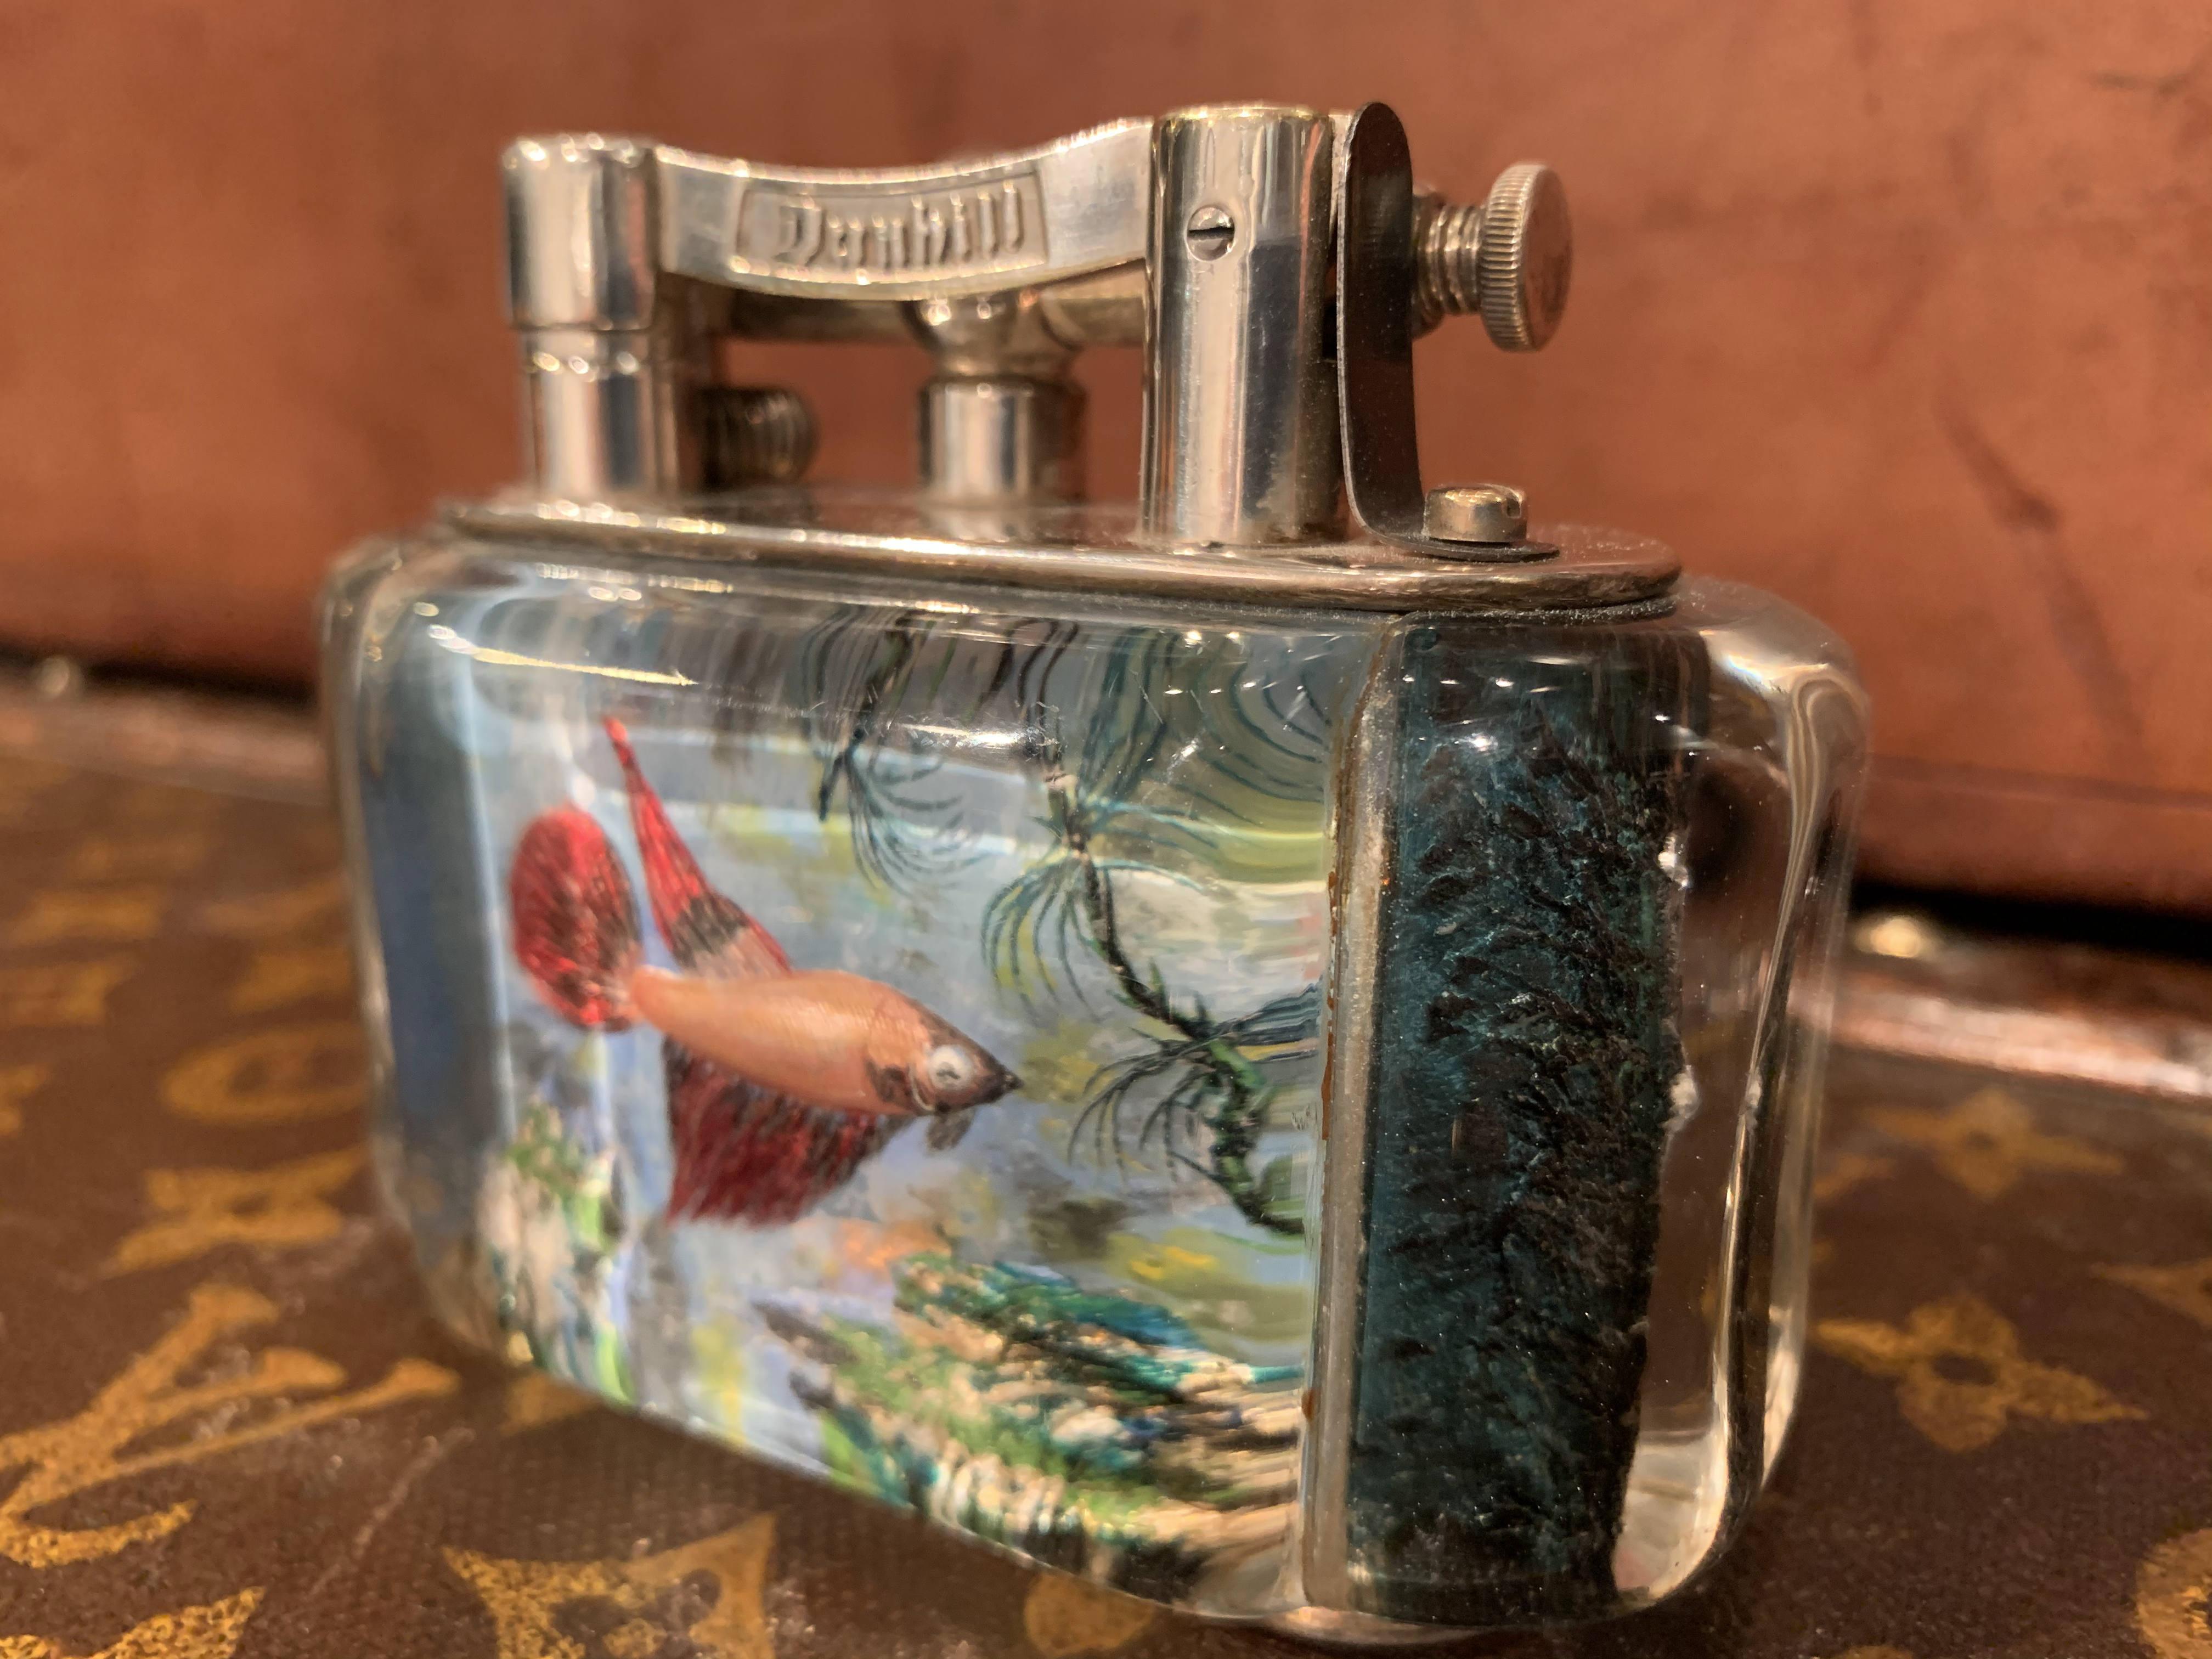 A rare 1950s Half-Giant Dunhill aquarium table lighter (made in England) with silver plated metal work
Each of these lighters are very rare and unique as they were hand carved and painted and no one look exactly similar.

Ben Shillingford